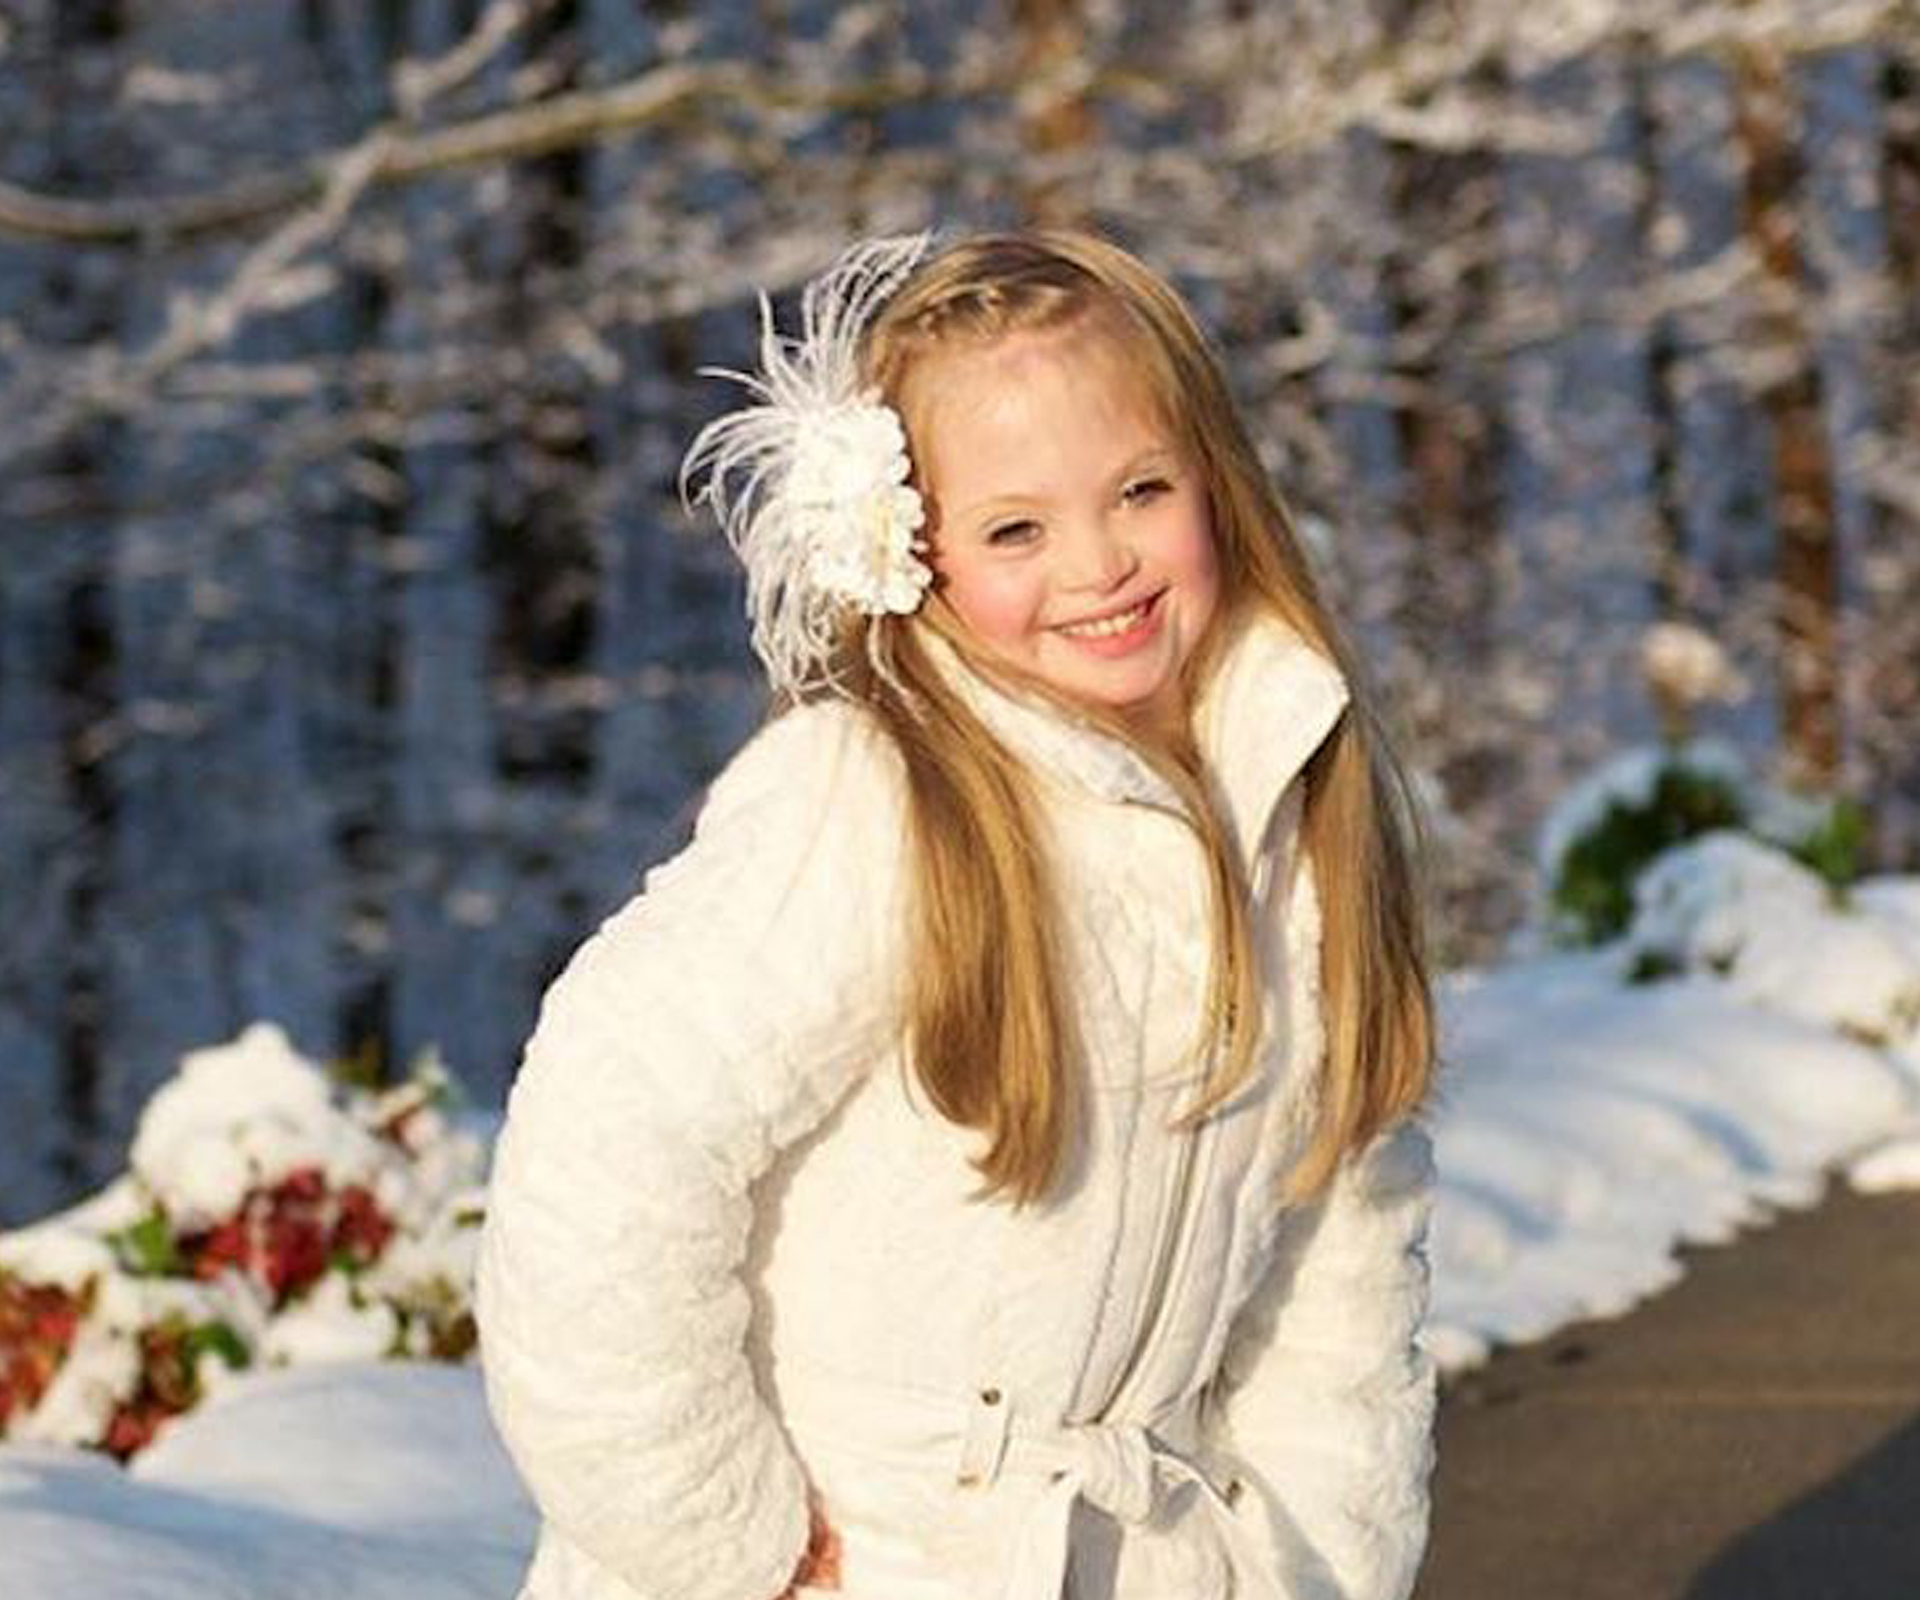 GAP introduces first model with Down syndrome